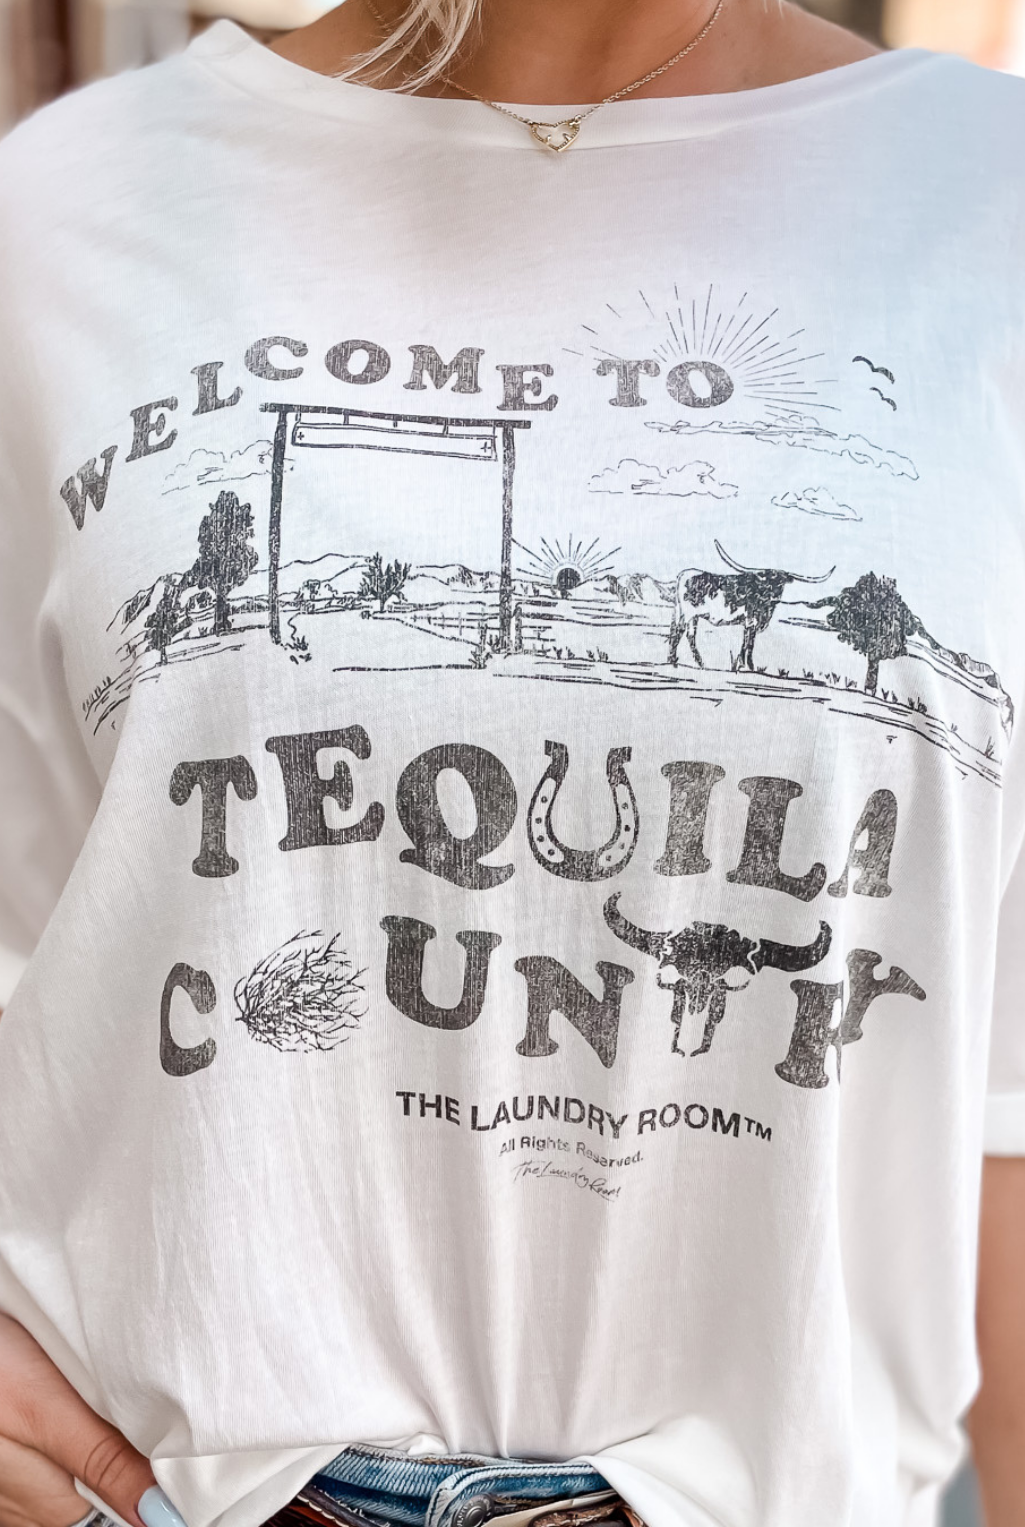 Tequila Country T-Shirt